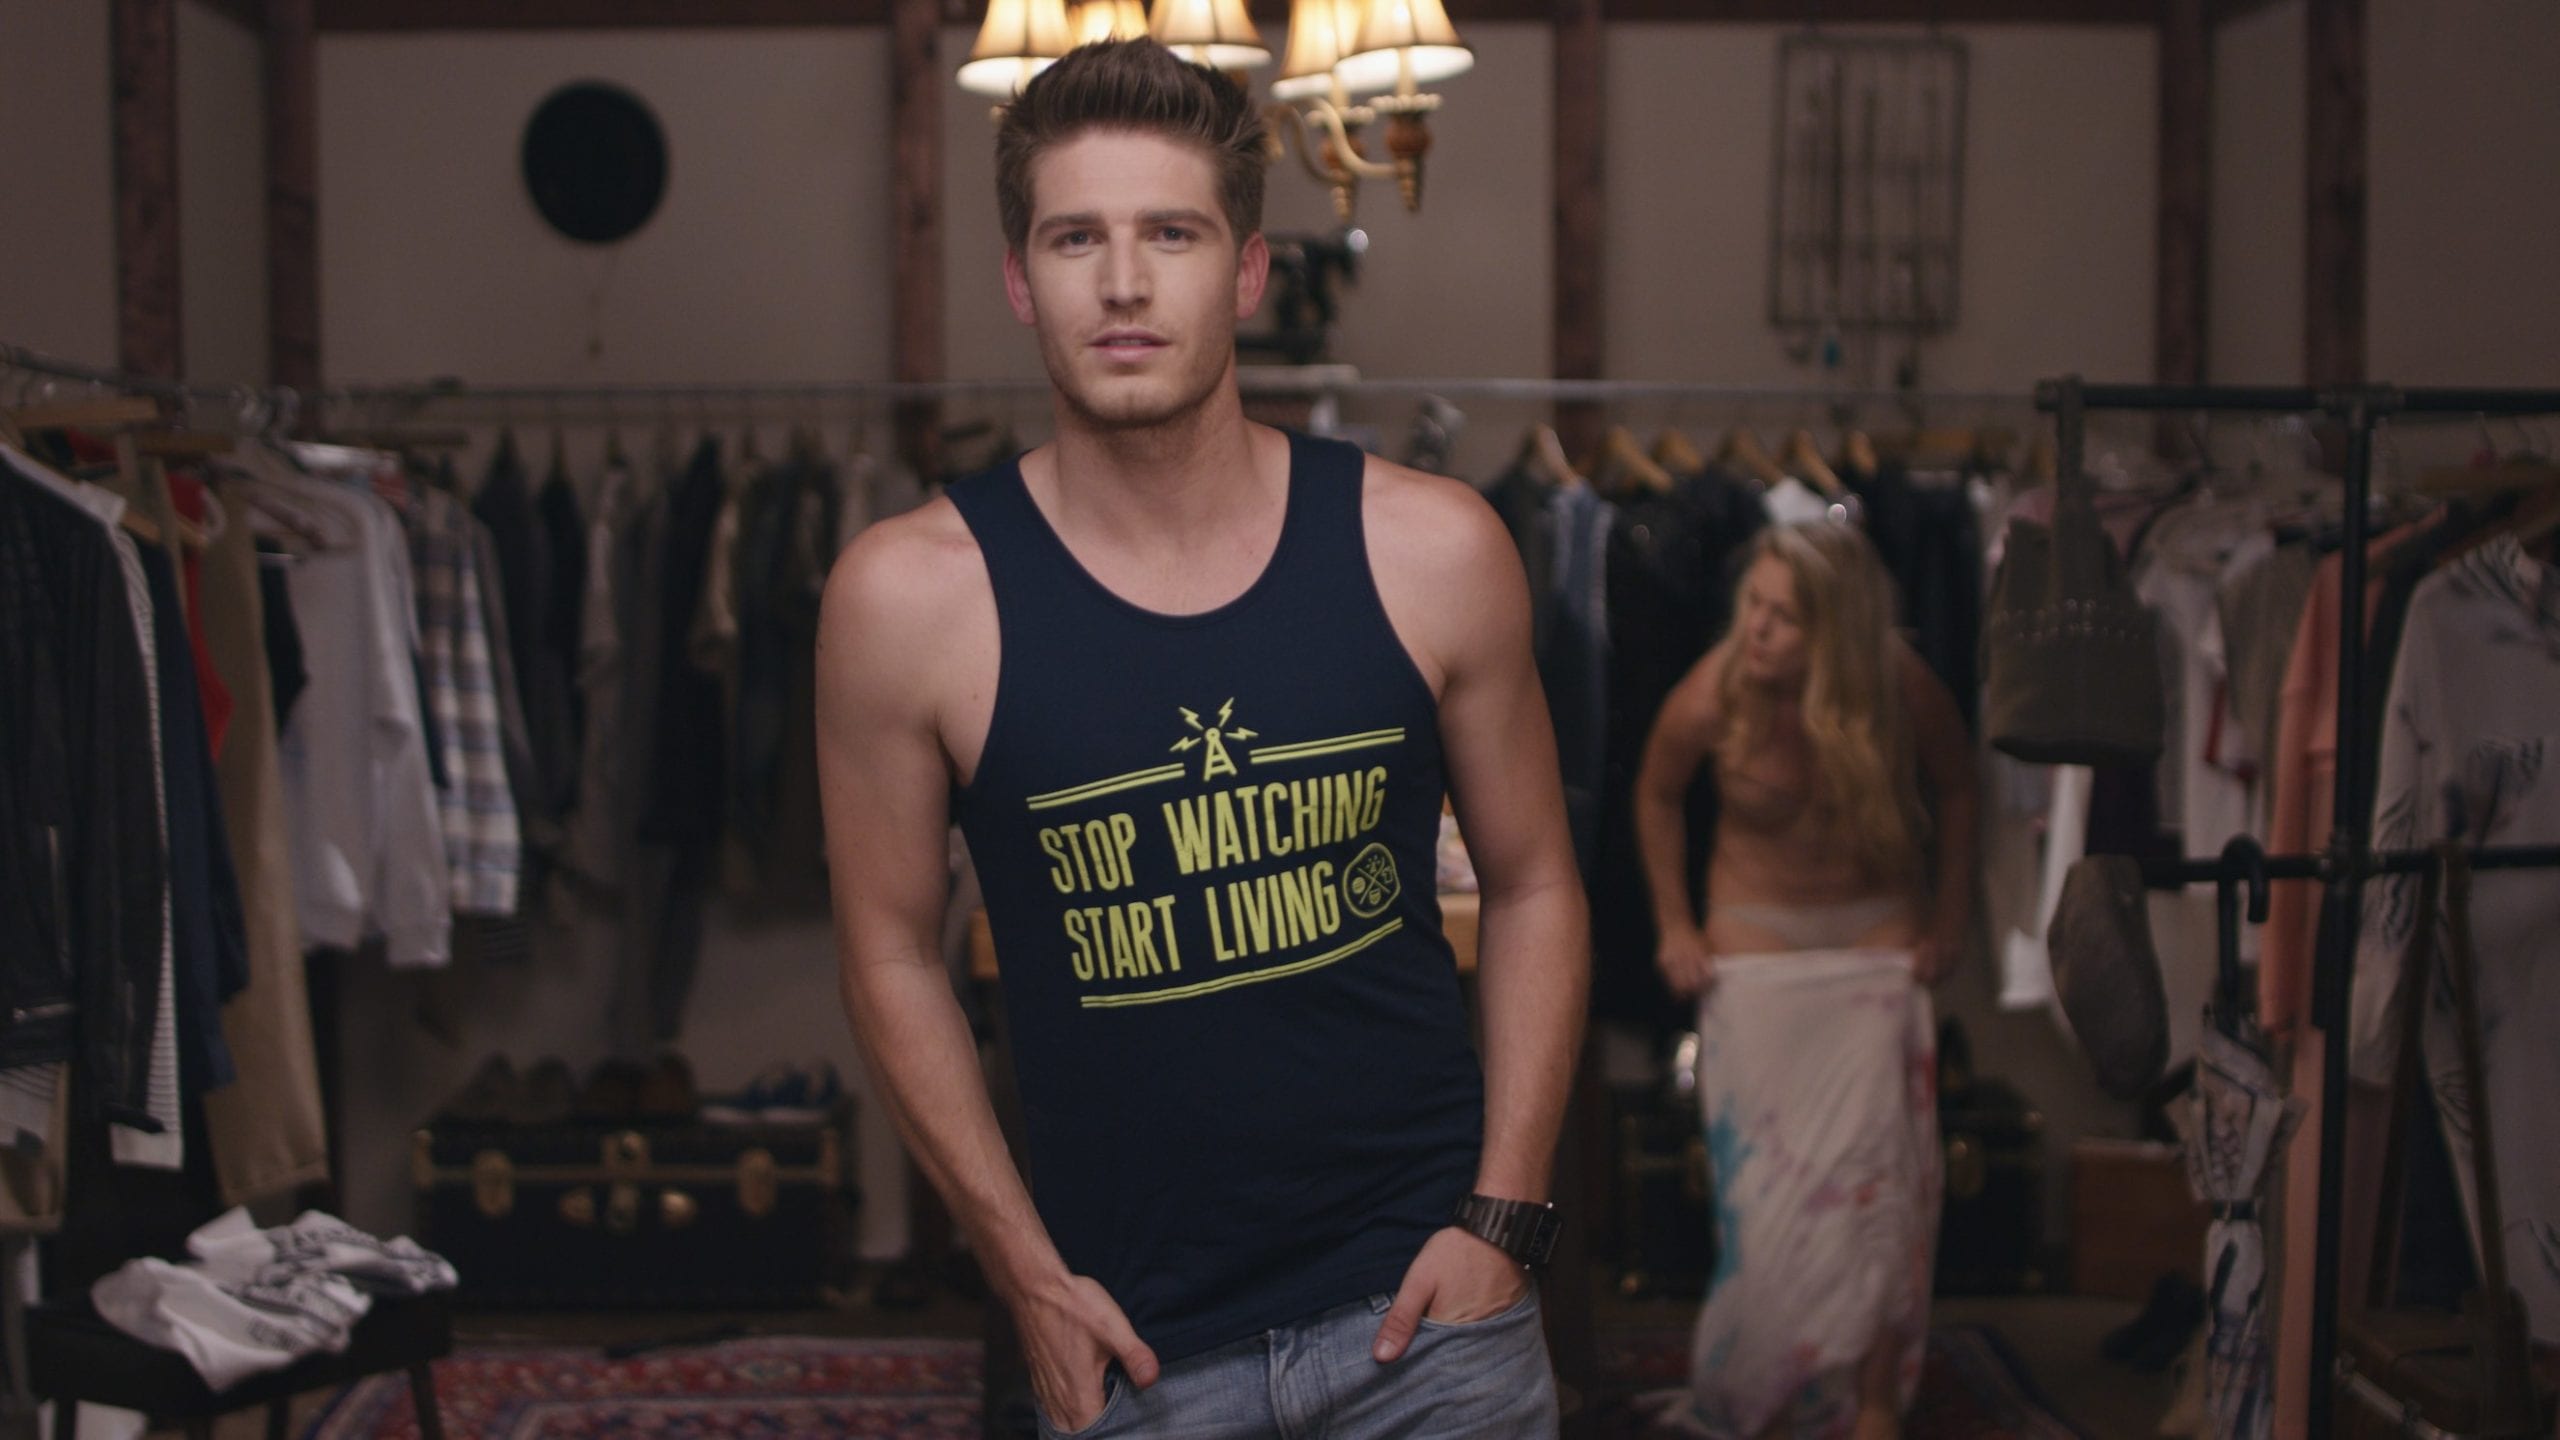 AllSaints Clothing Brand Young man with short hair wearing a black tank top that says Stop Watching Start Living in a wardrobe room with a woman putting on a dress in the background